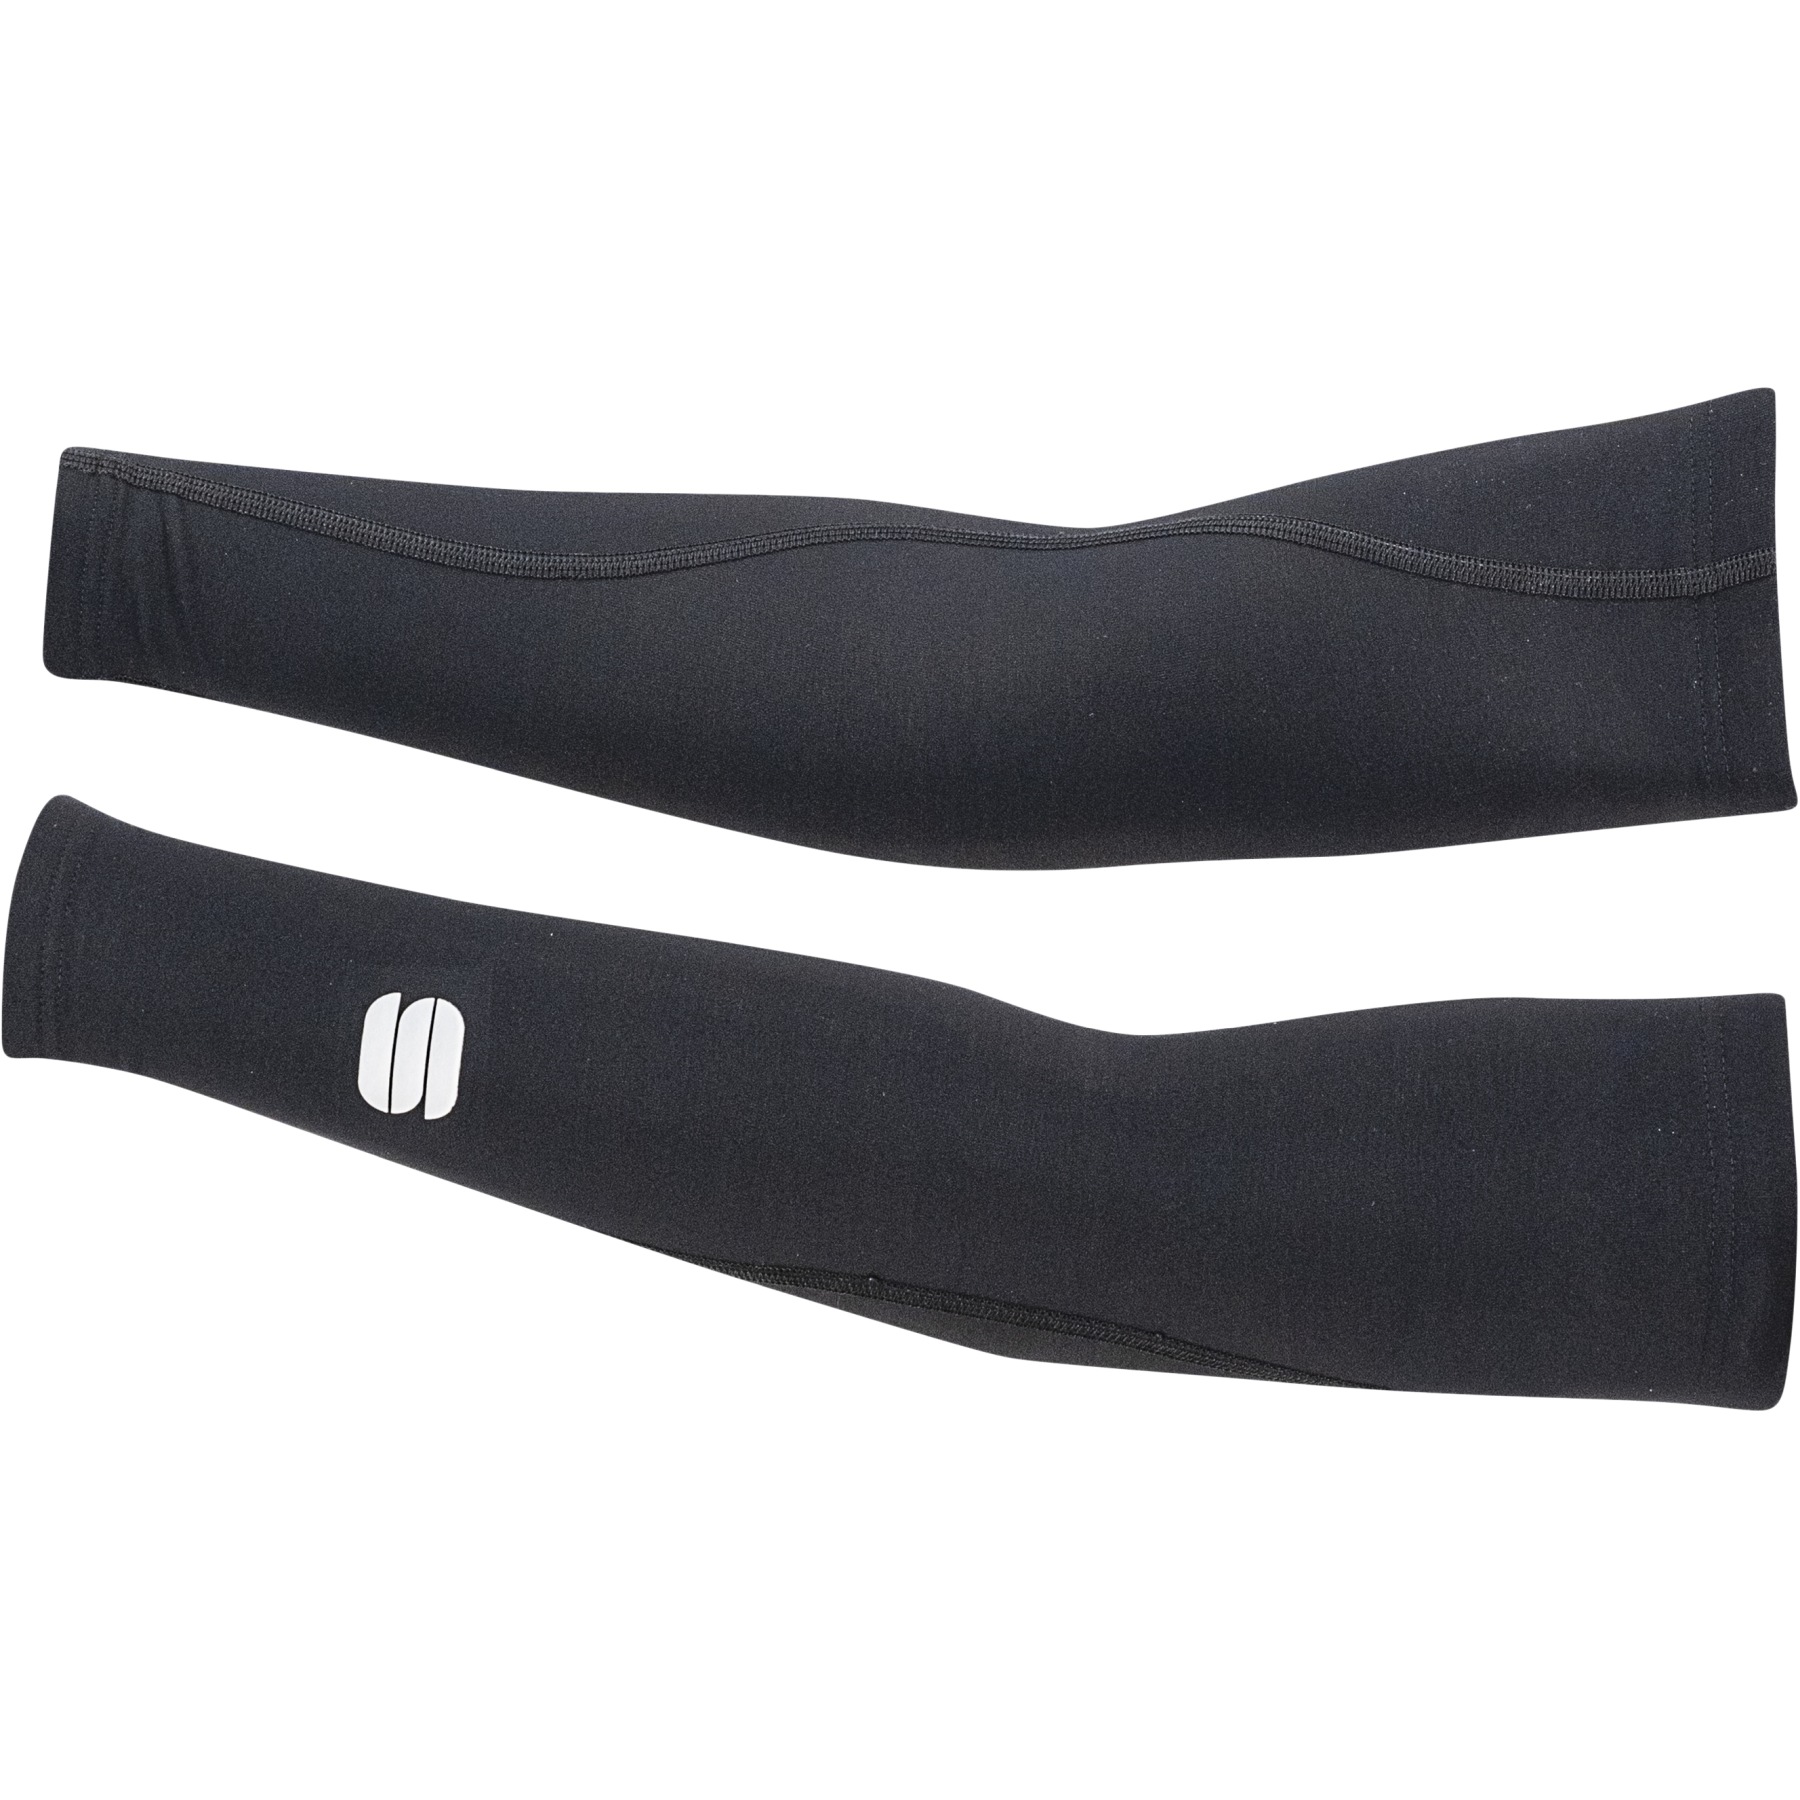 Picture of Sportful Thermodrytex Arm Warmers - 002 Black